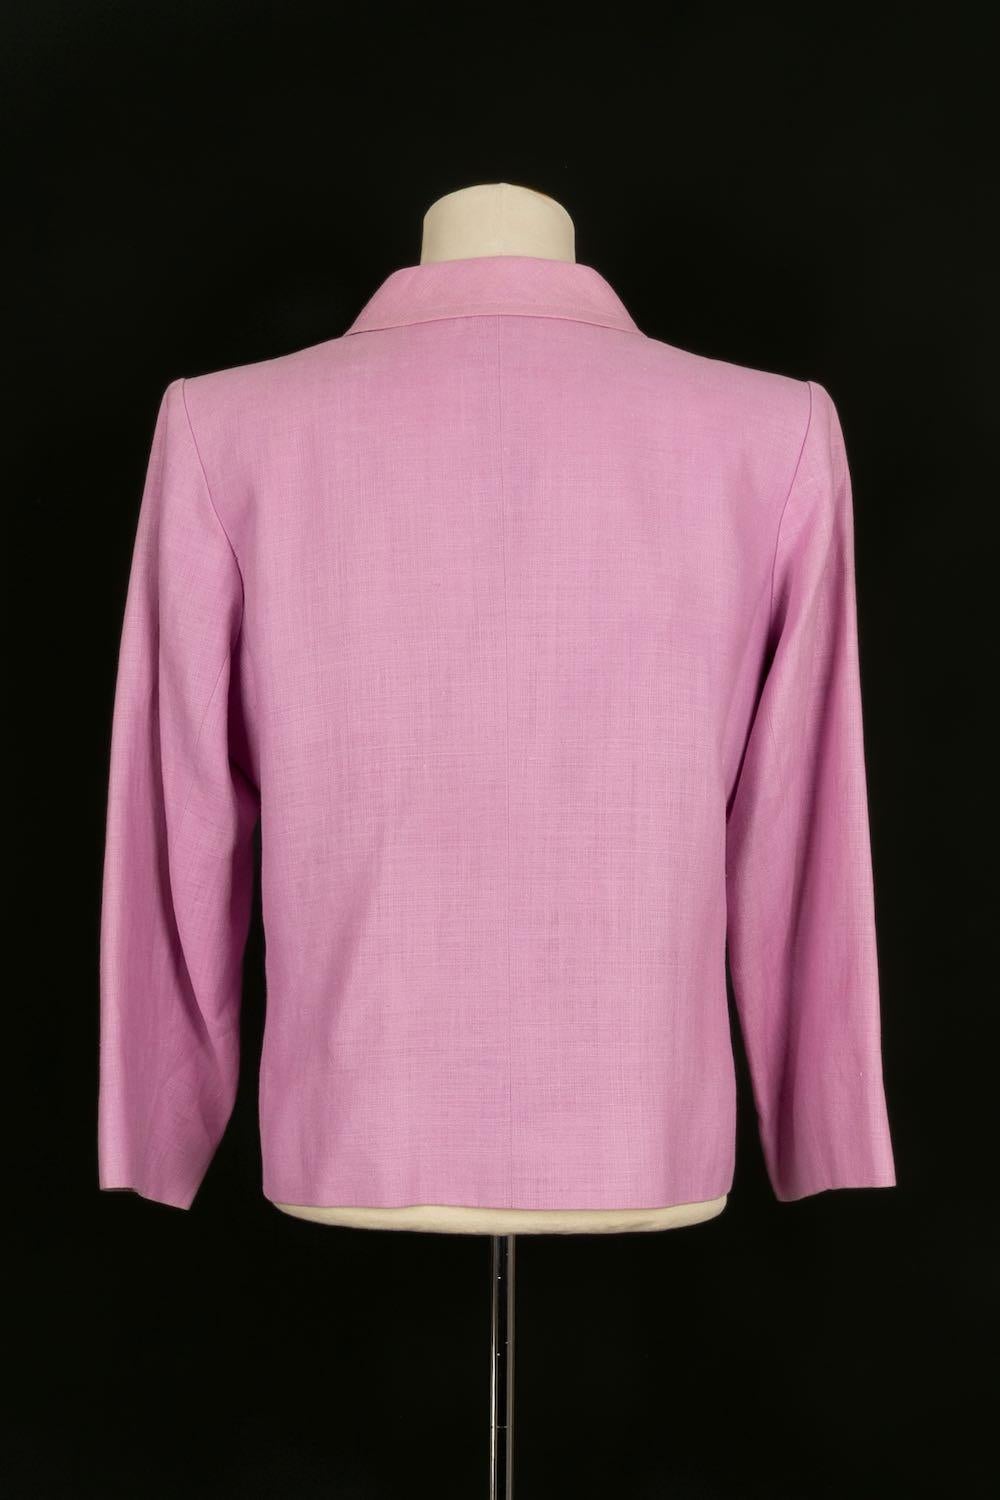 Christian Lacroix Jacket and Skirt in Mauve Suit For Sale 5